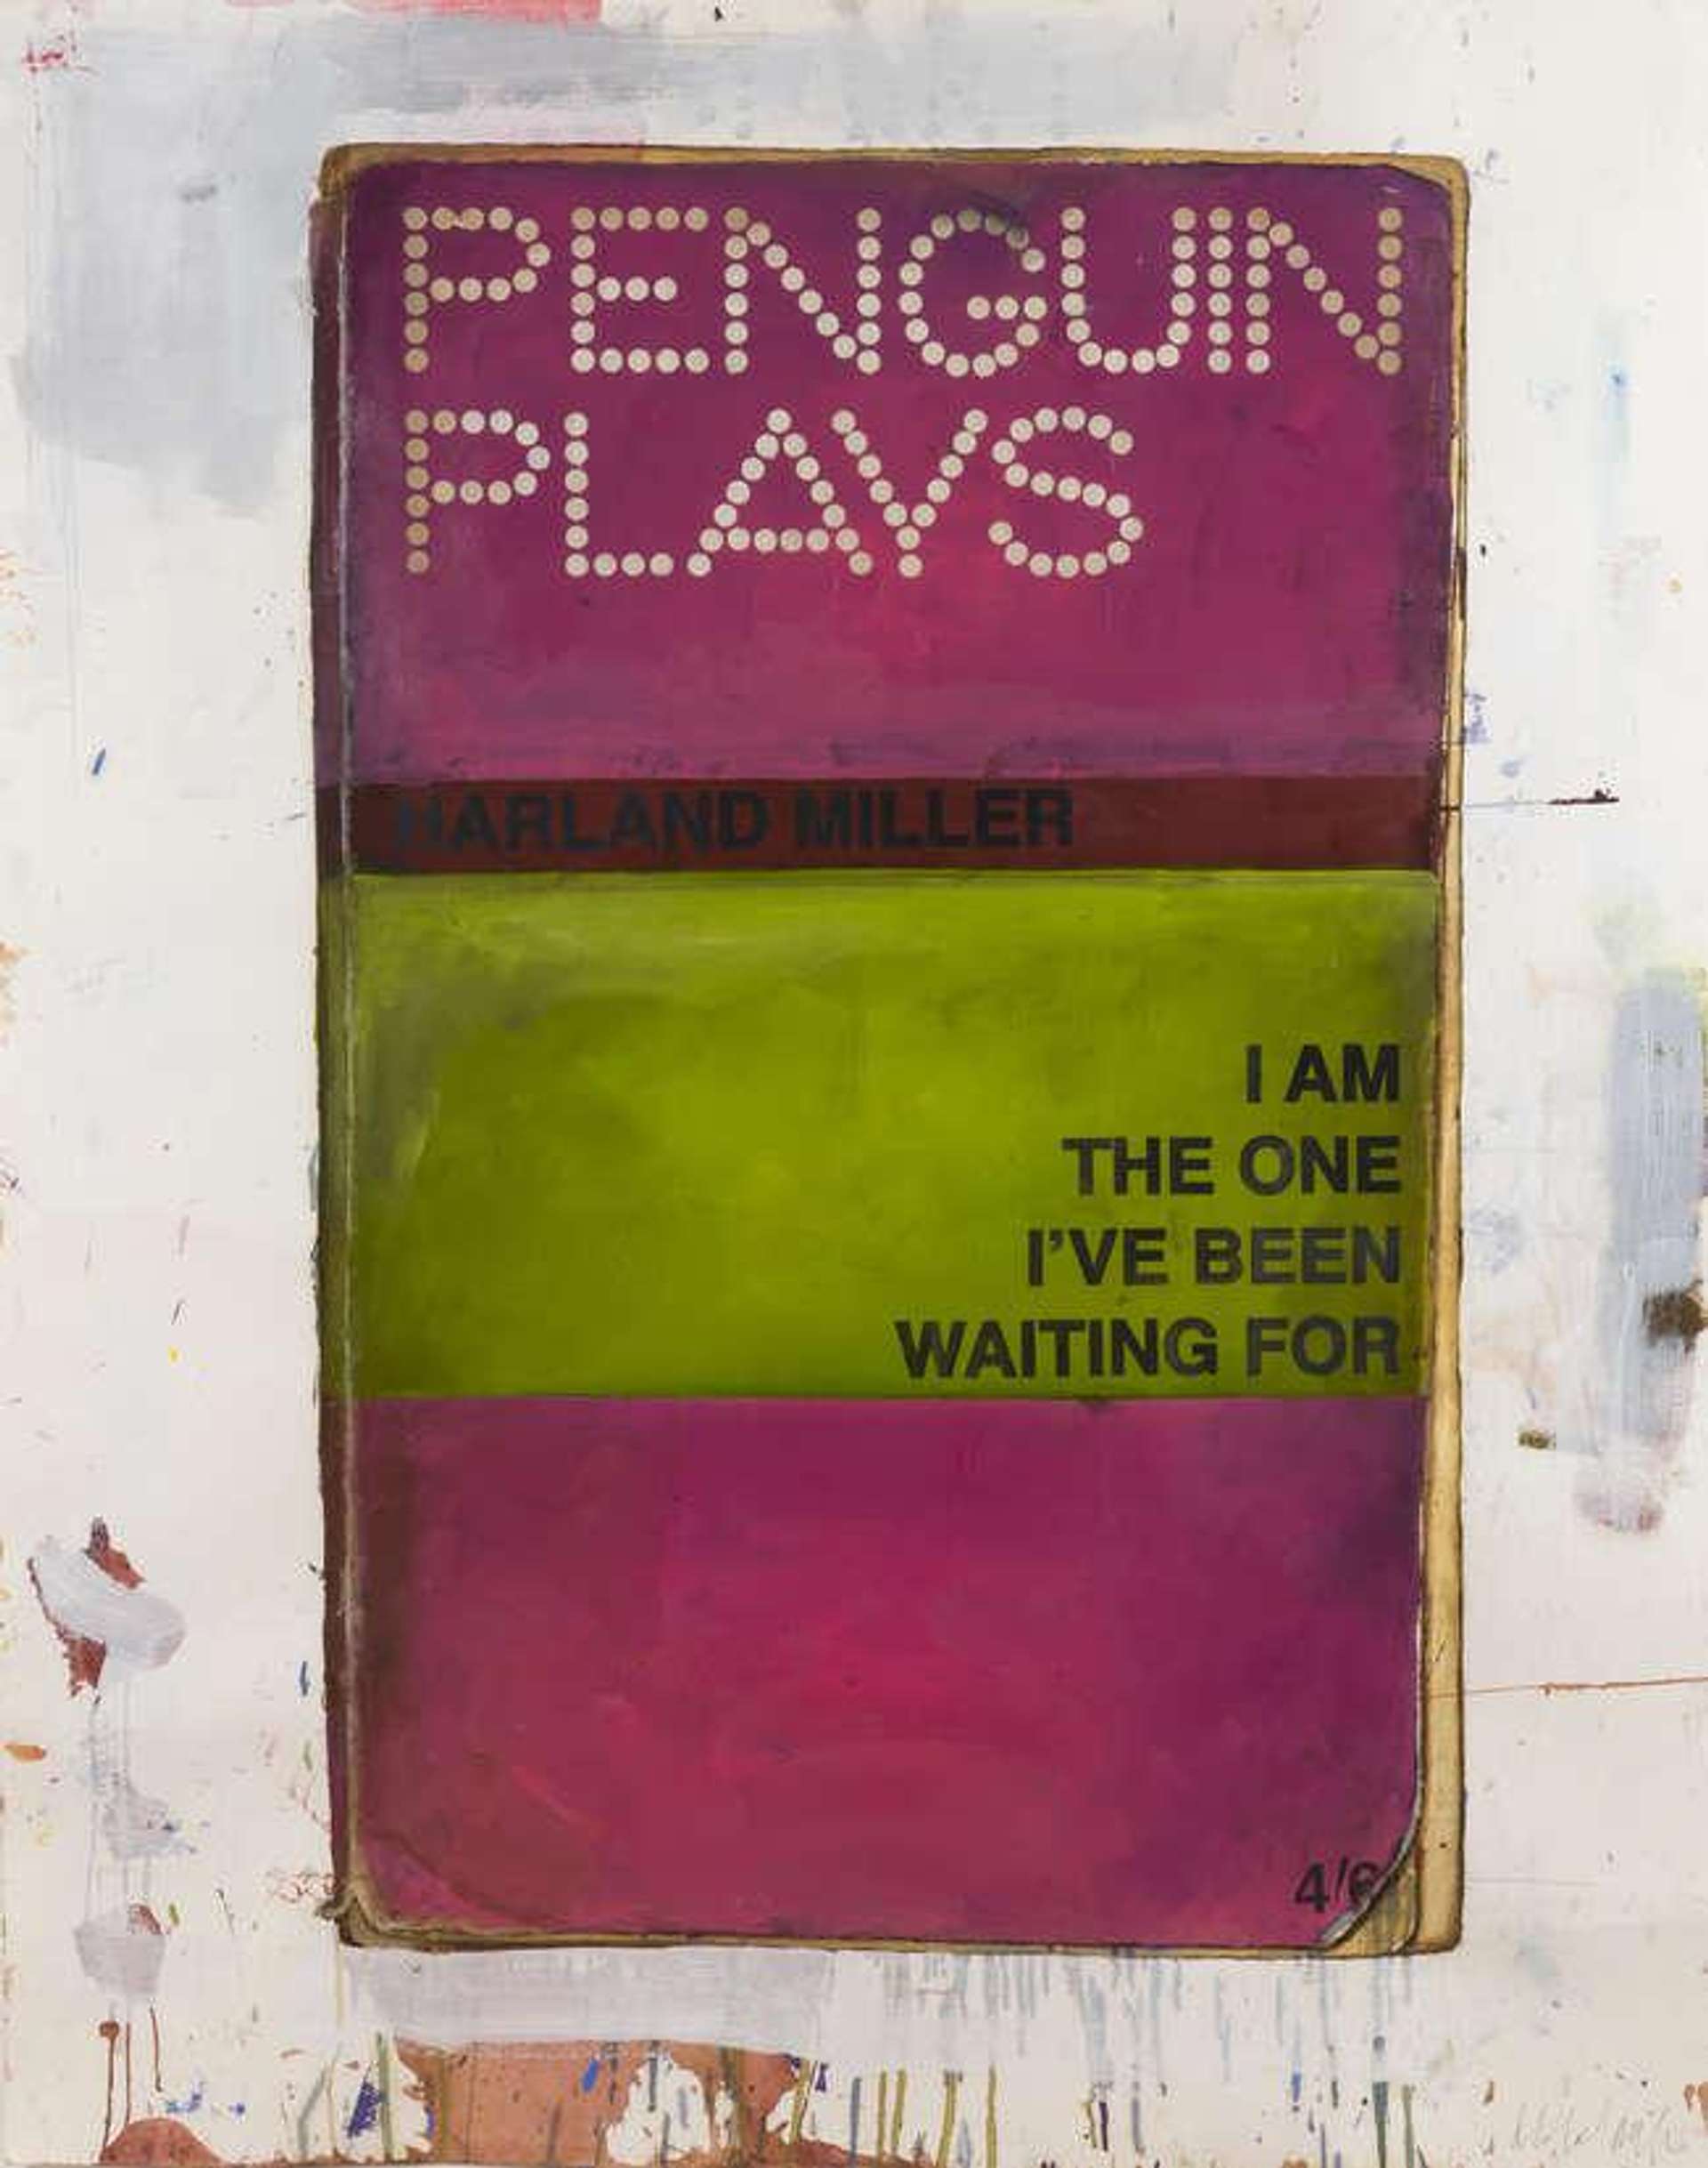 I Am The One I've Been Waiting For (red and yellow) by Harland Miller